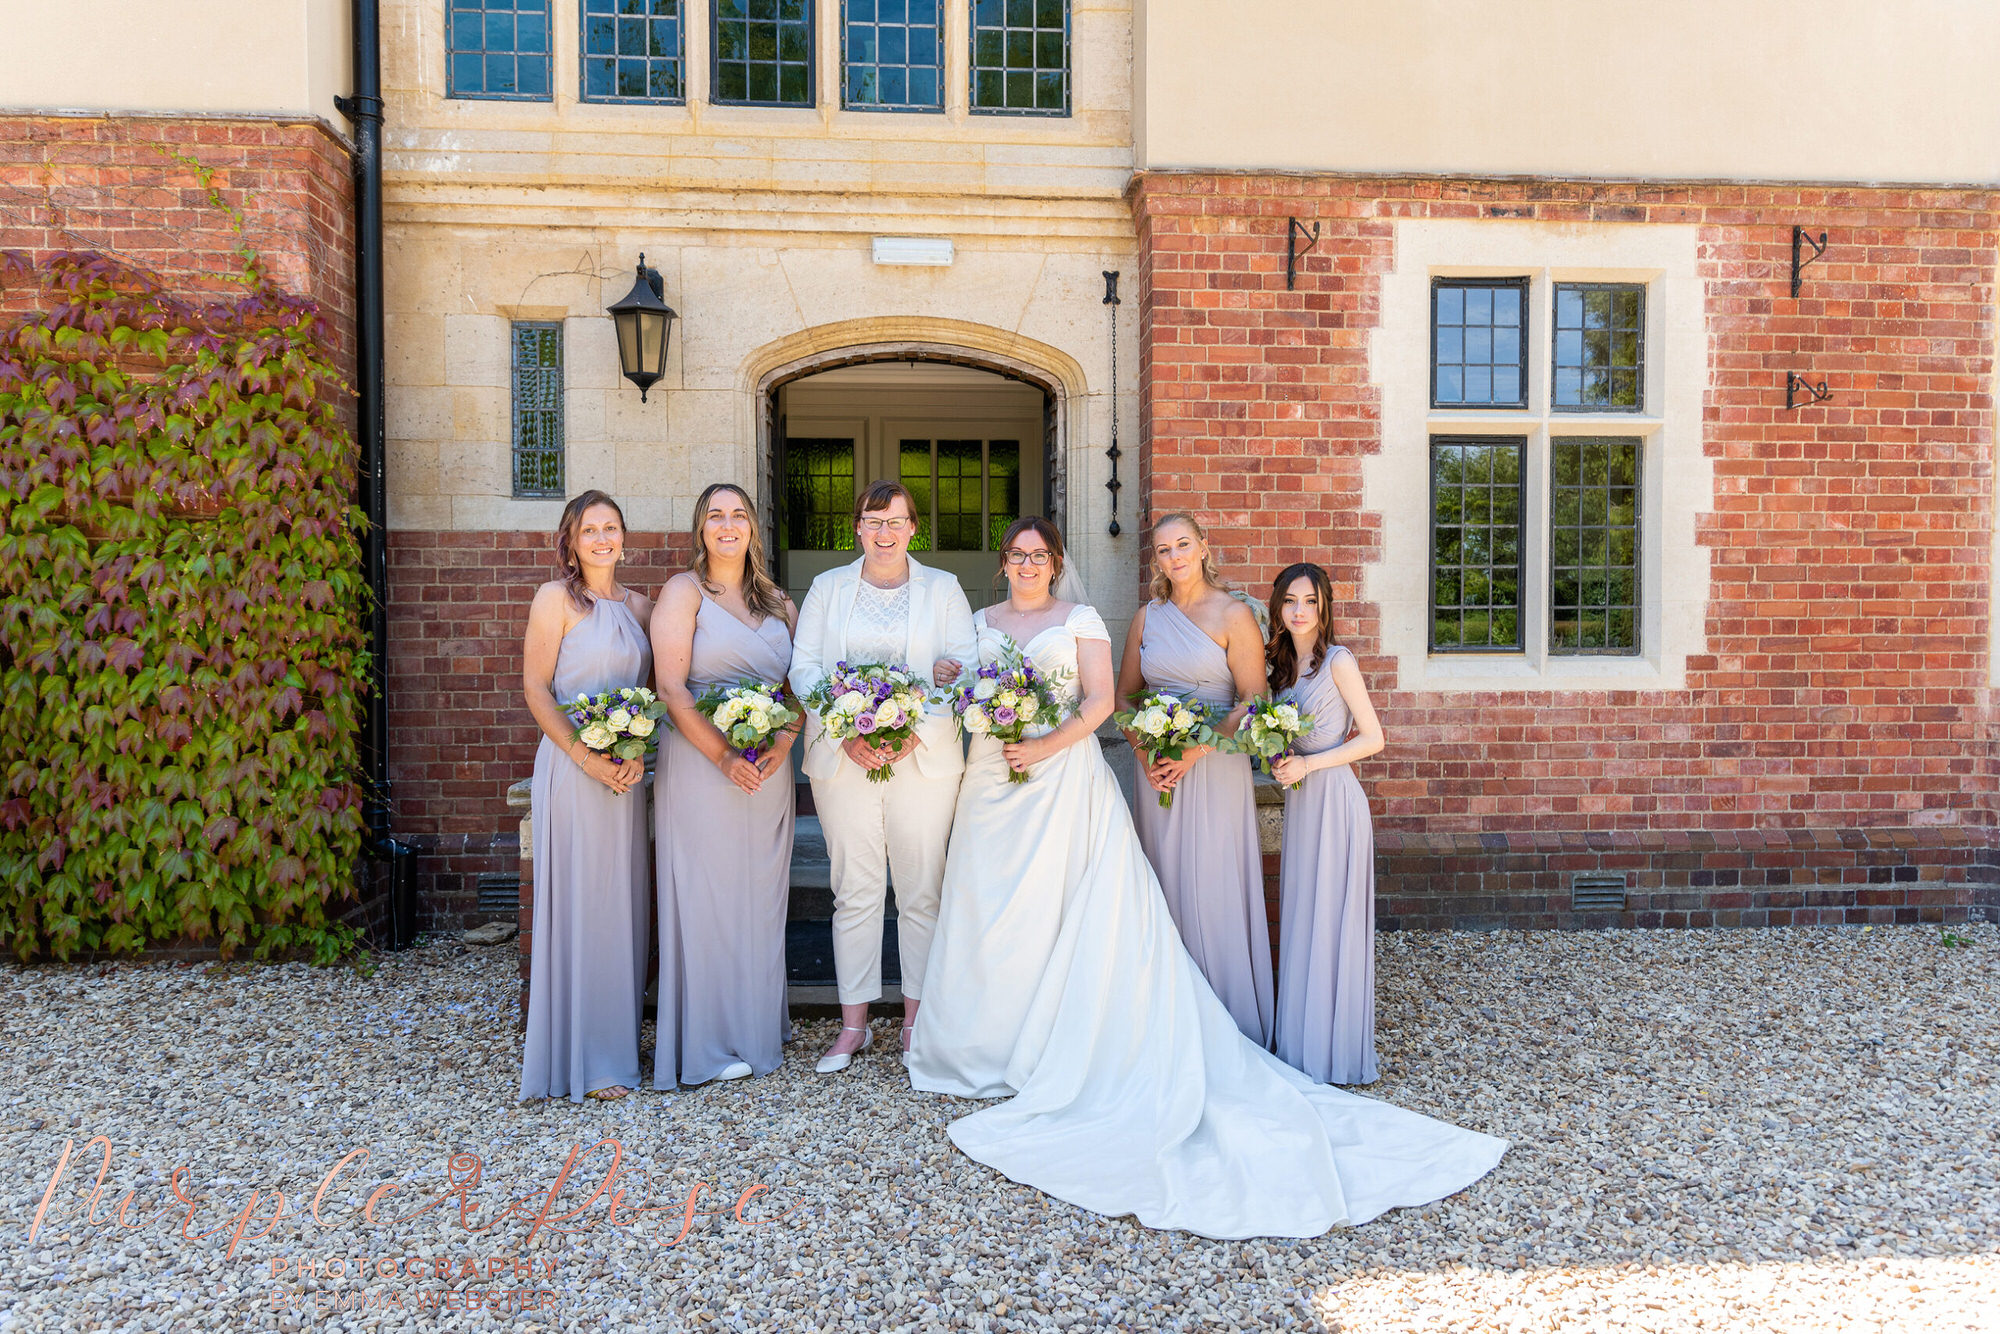 Brides with their bridesmaids